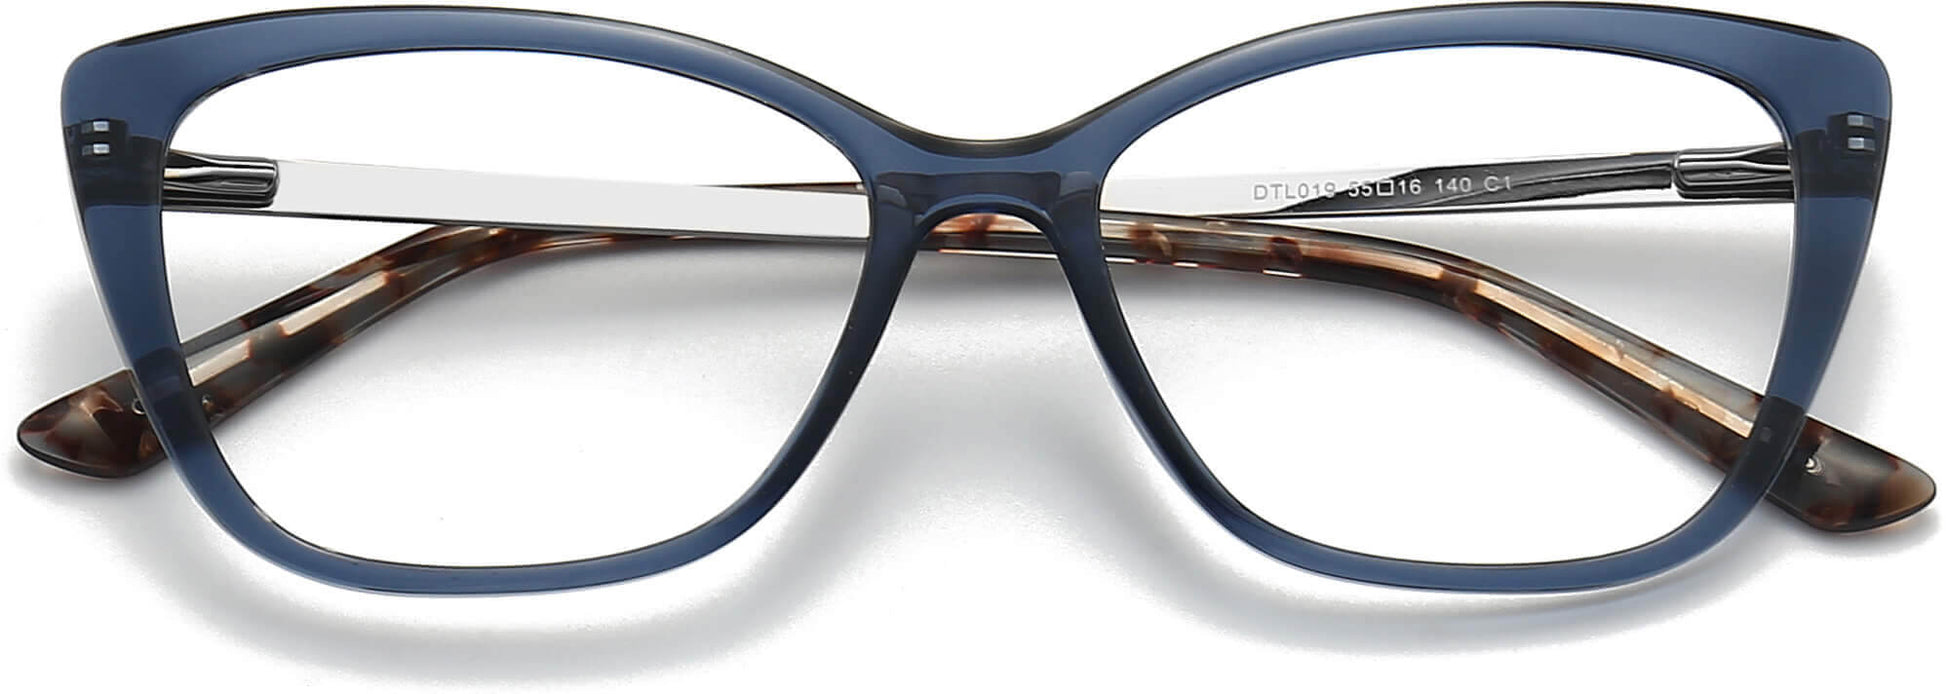 Bail Cateye Blue Eyeglasses from ANRRI, closed view